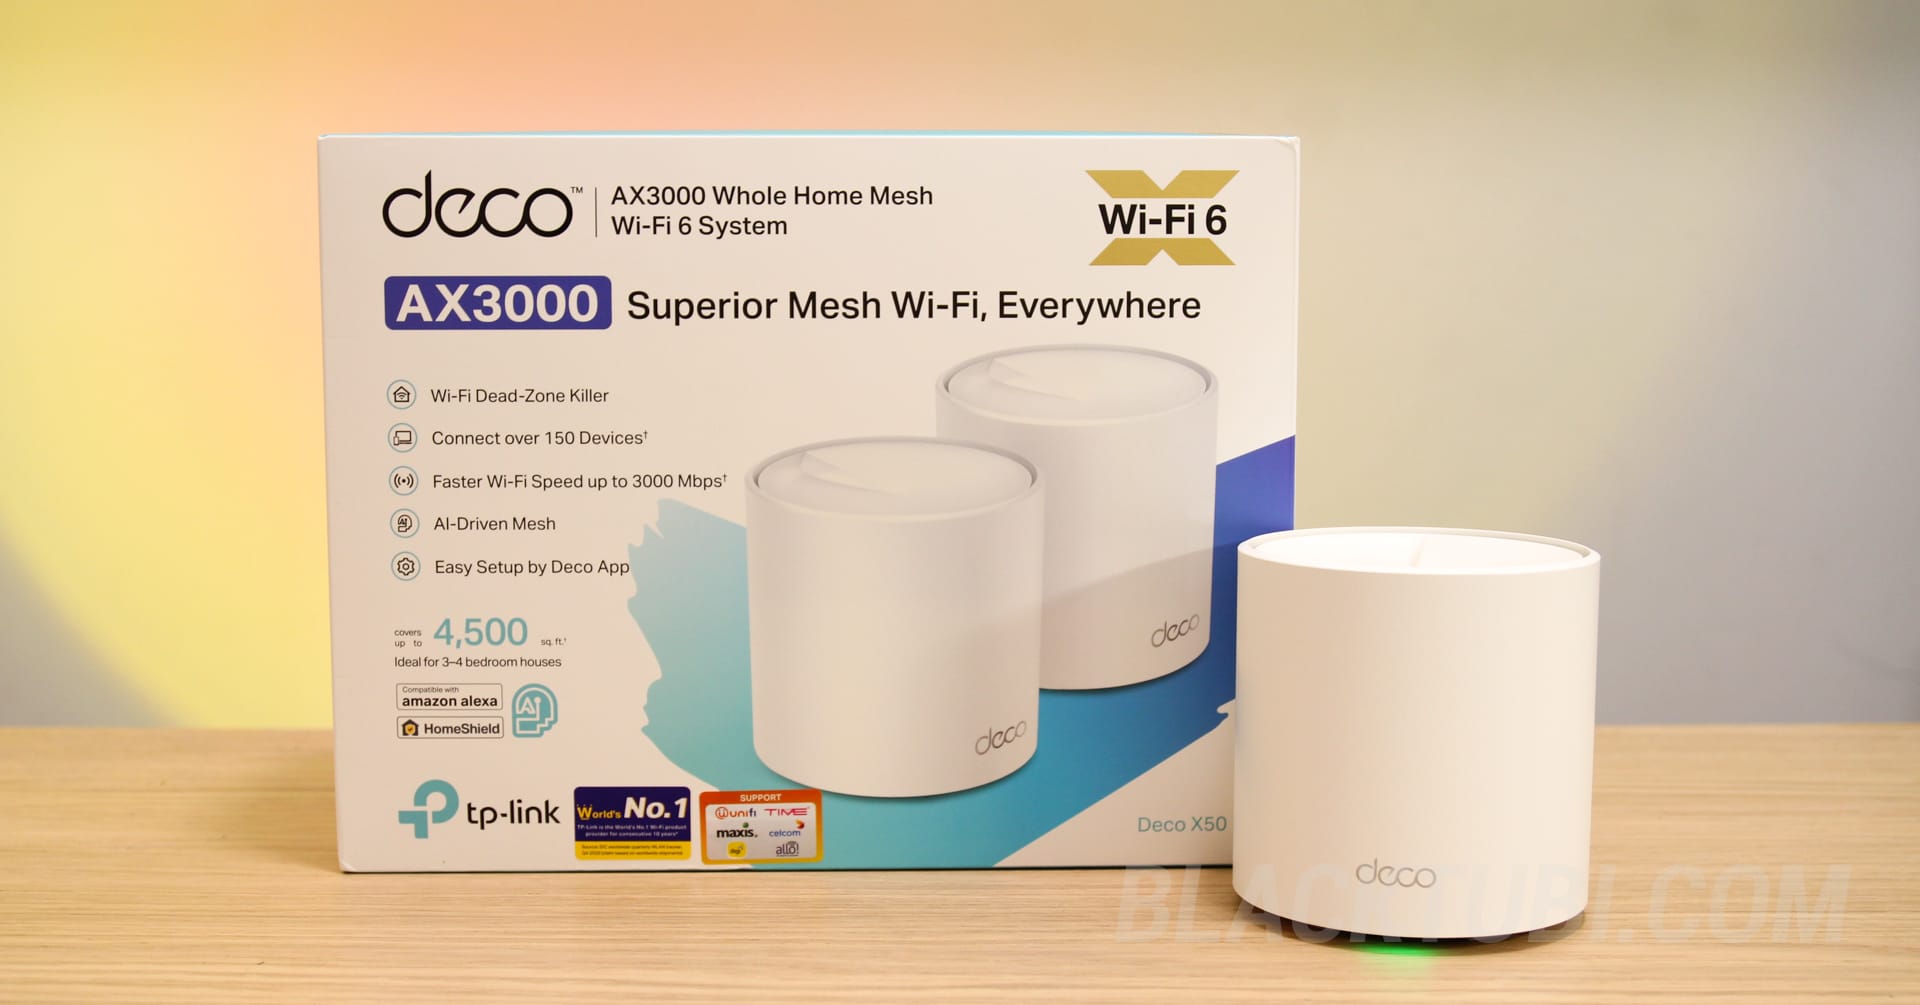  TP-Link Deco AX3000 WiFi 6 Mesh System(Deco X55) - Covers up to  6500 Sq.Ft. , Replaces Wireless Router and Extender, 3 Gigabit ports per  unit, supports Ethernet Backhaul (3-pack) : Everything Else